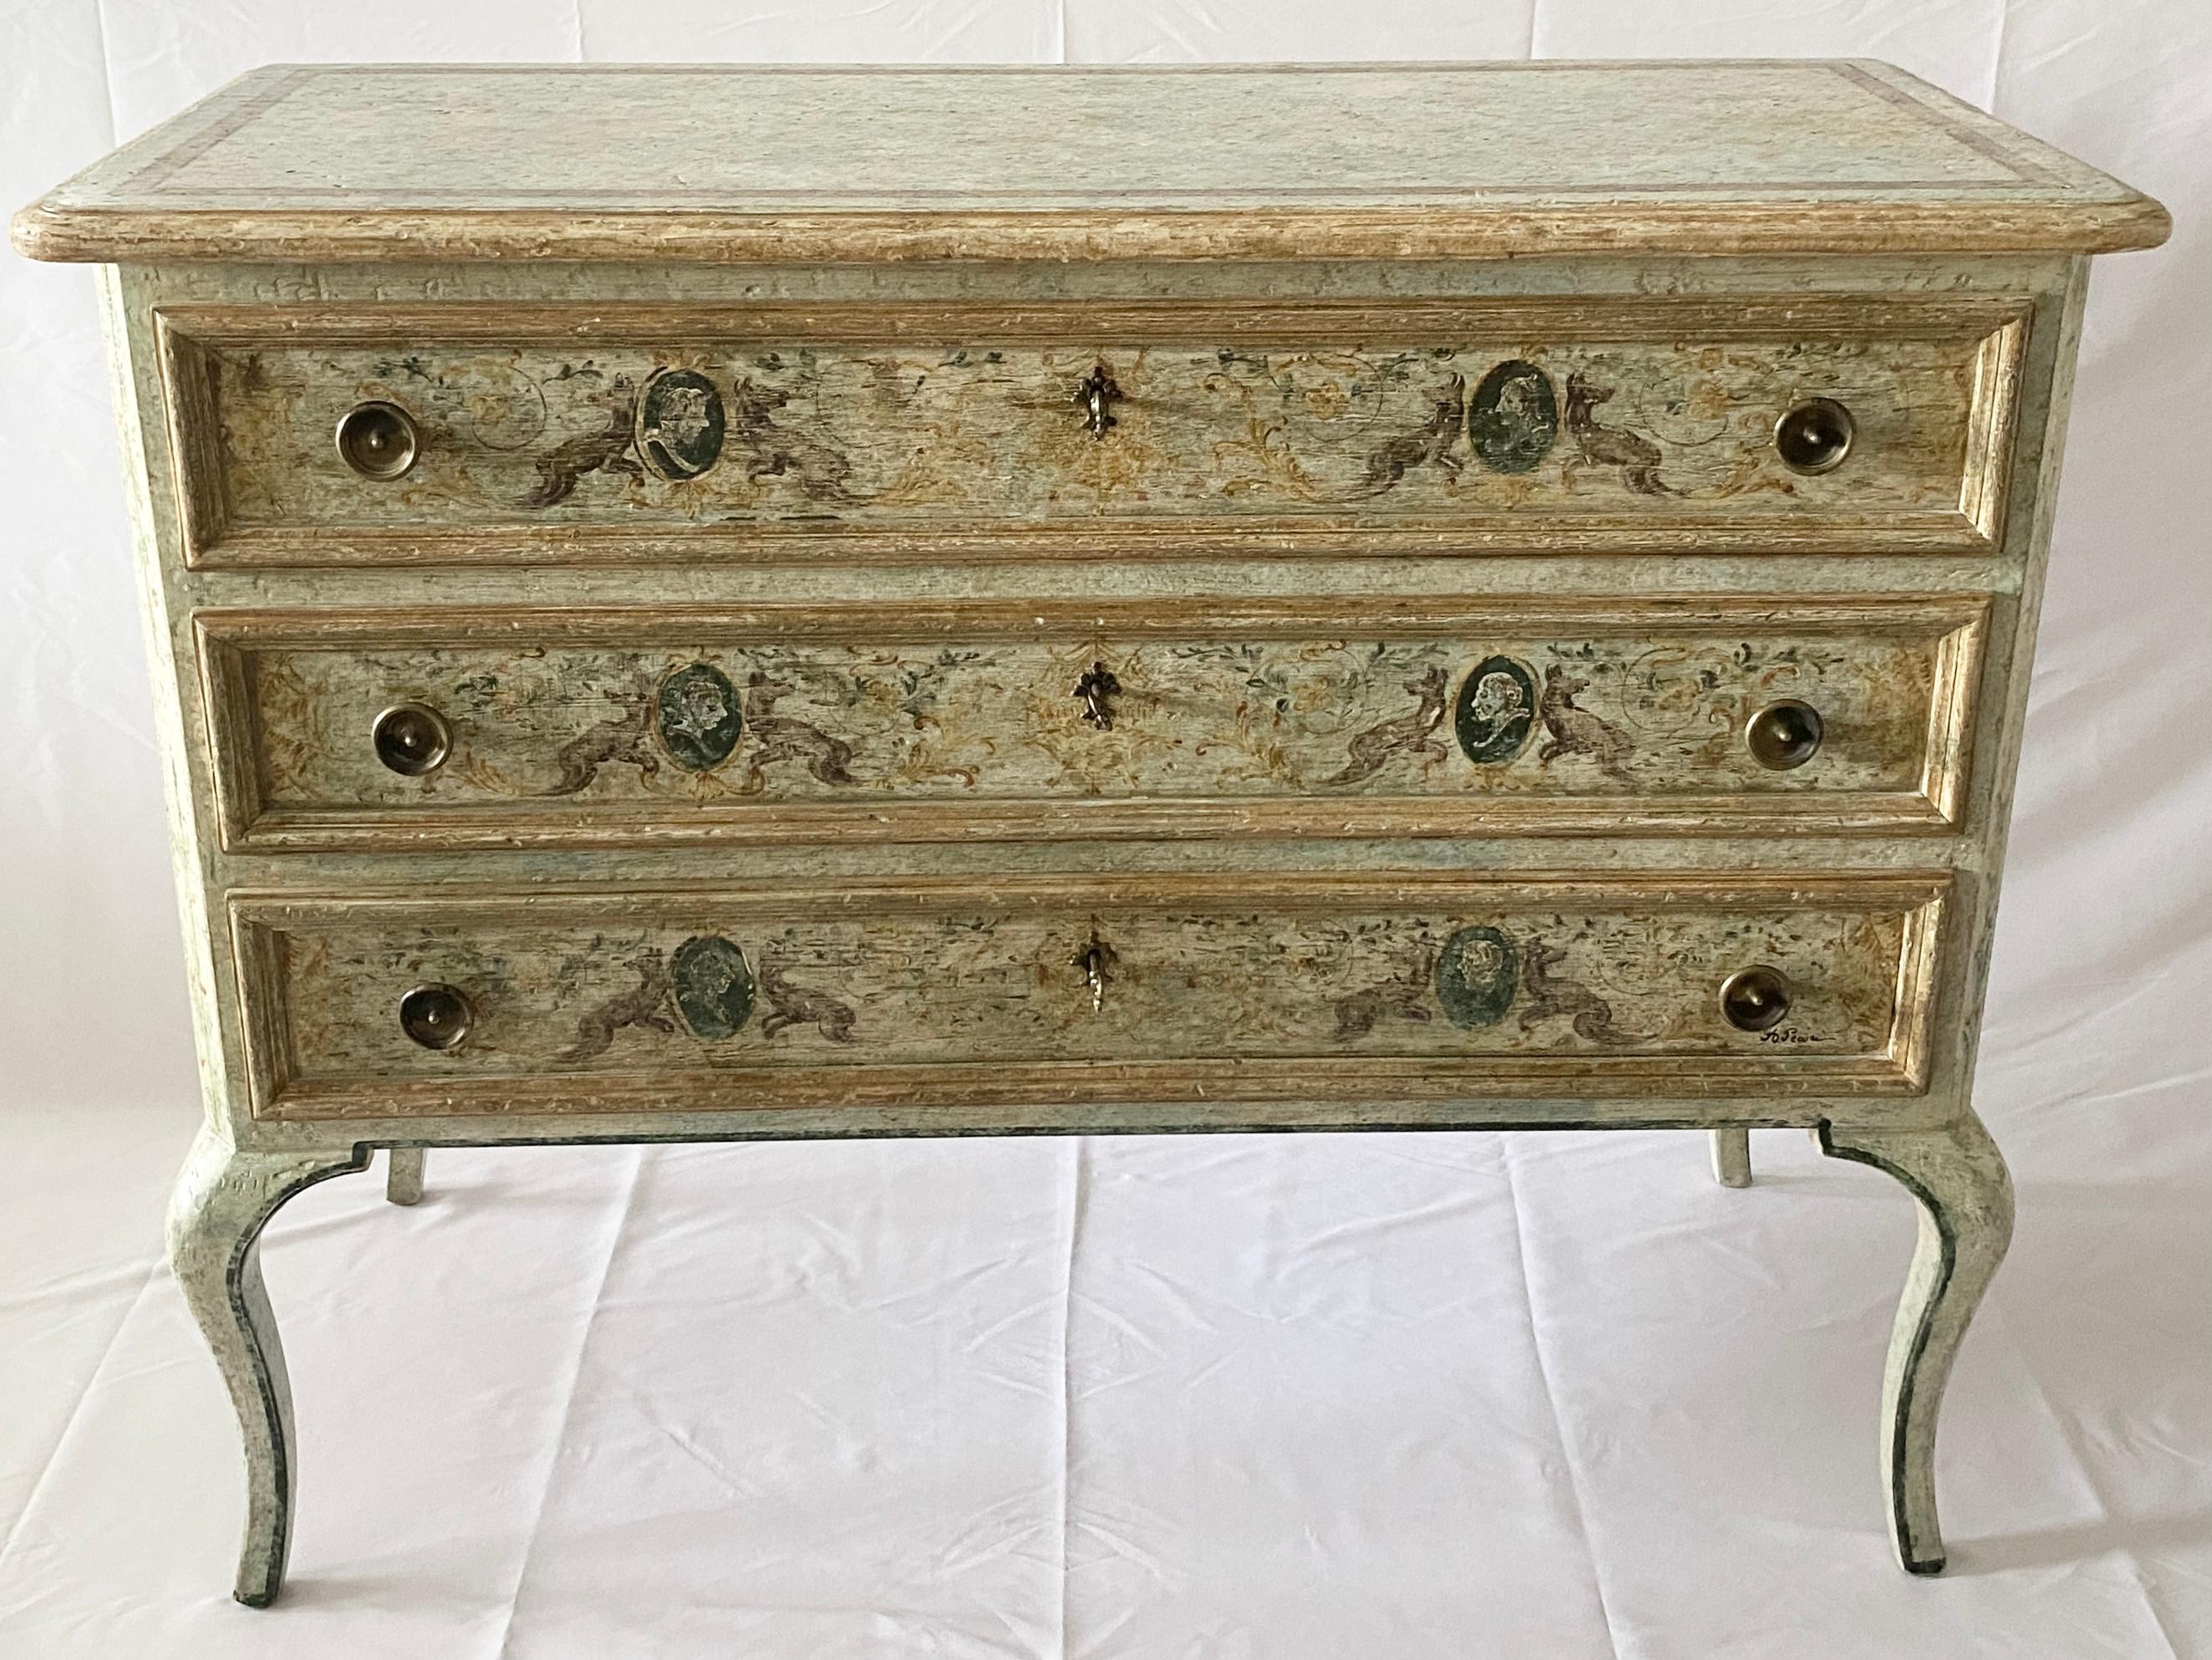 A fine pair of Neoclassical Style Commodes or Venetian Hand Painted Chest of Drawers featuring fine scroll work in hues of yellow ochres, olive greens and blues on an antiqued white background. The overall warm tones of the paintwork are accentuated